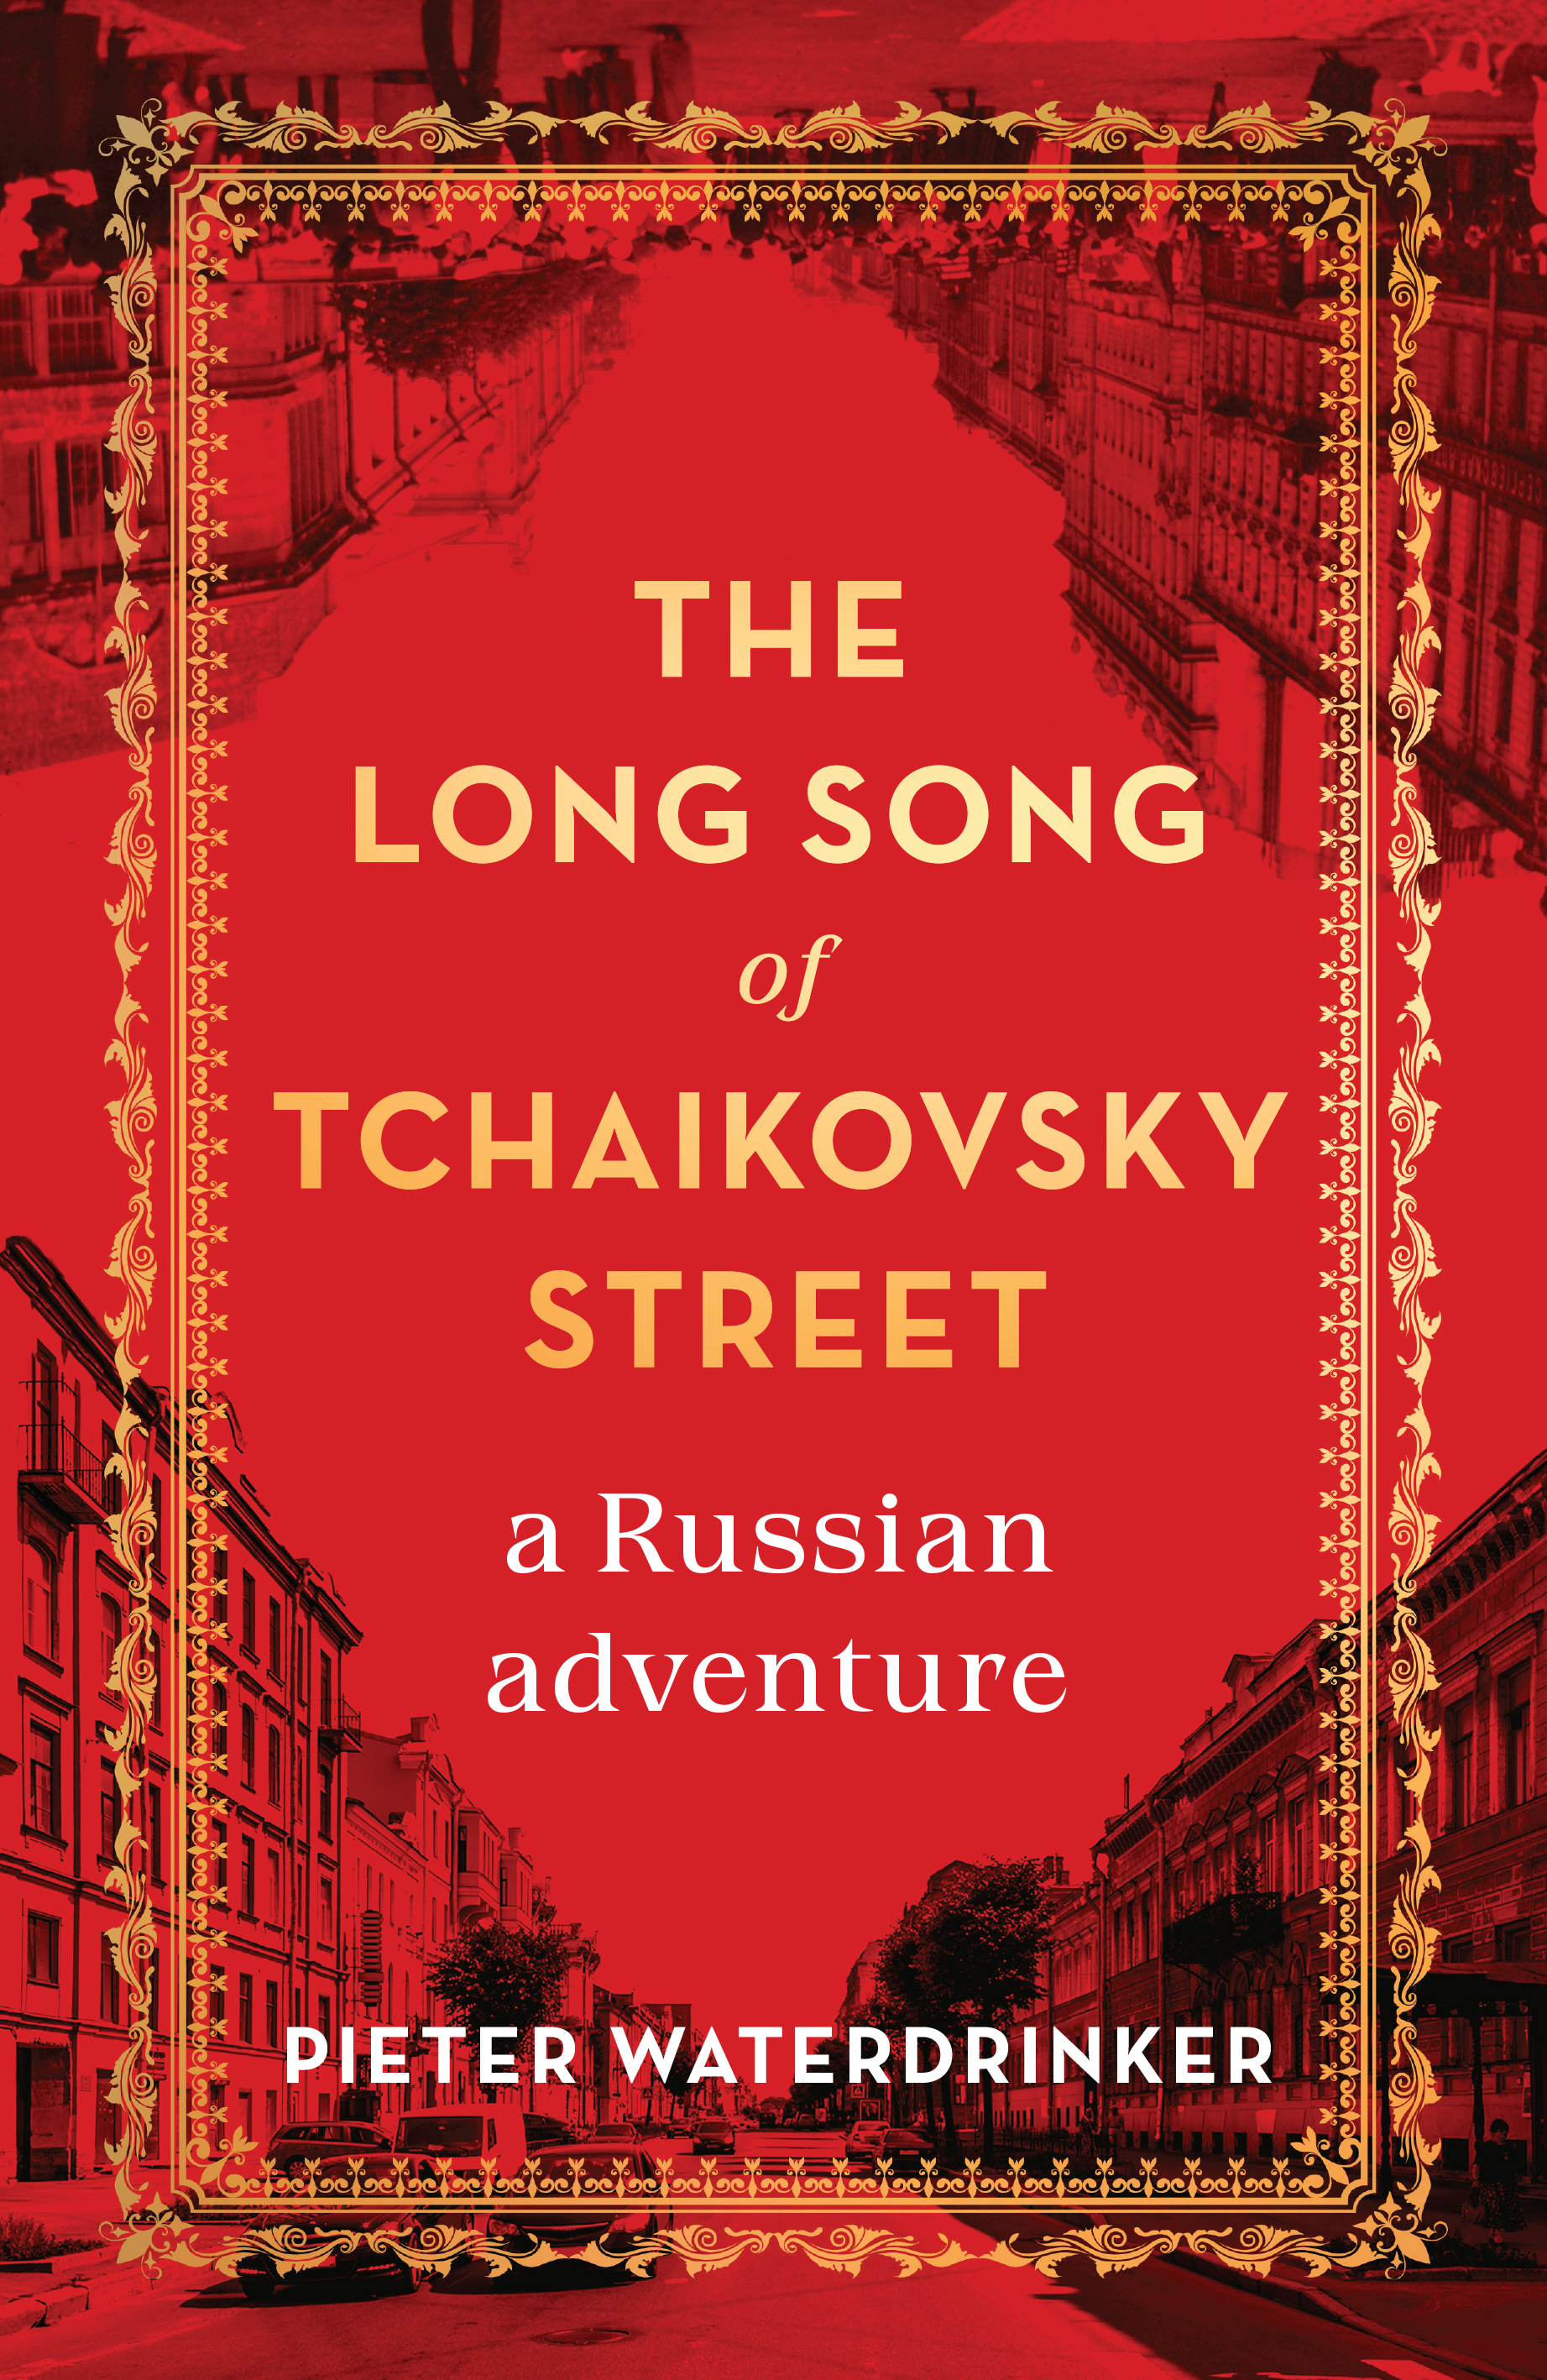 Pieter Waterdrinker's The Long Song of Tchaikovsky Street book cover